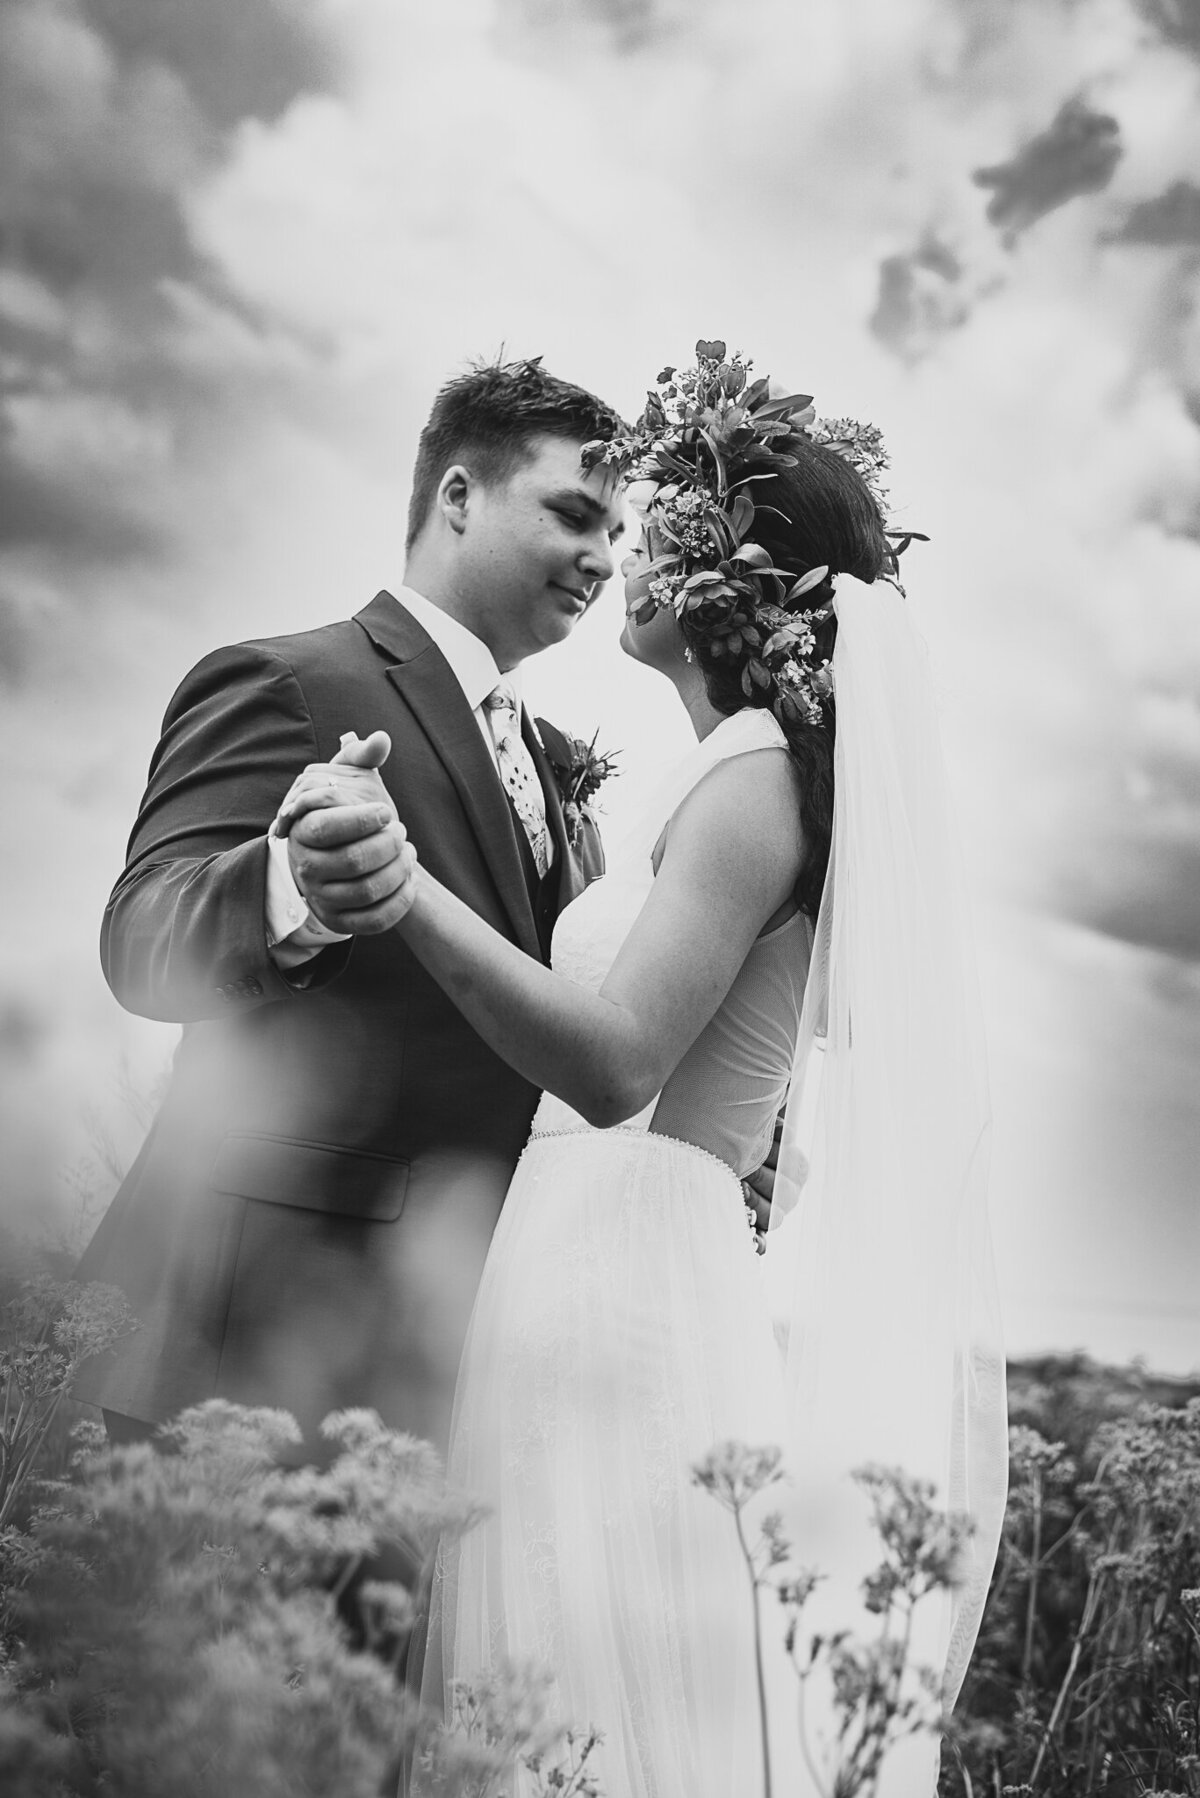 Bride and groom, Ronicia and Jack Henderson, dance together underneath clounds in a field of flowers in Xenia, Ohio.